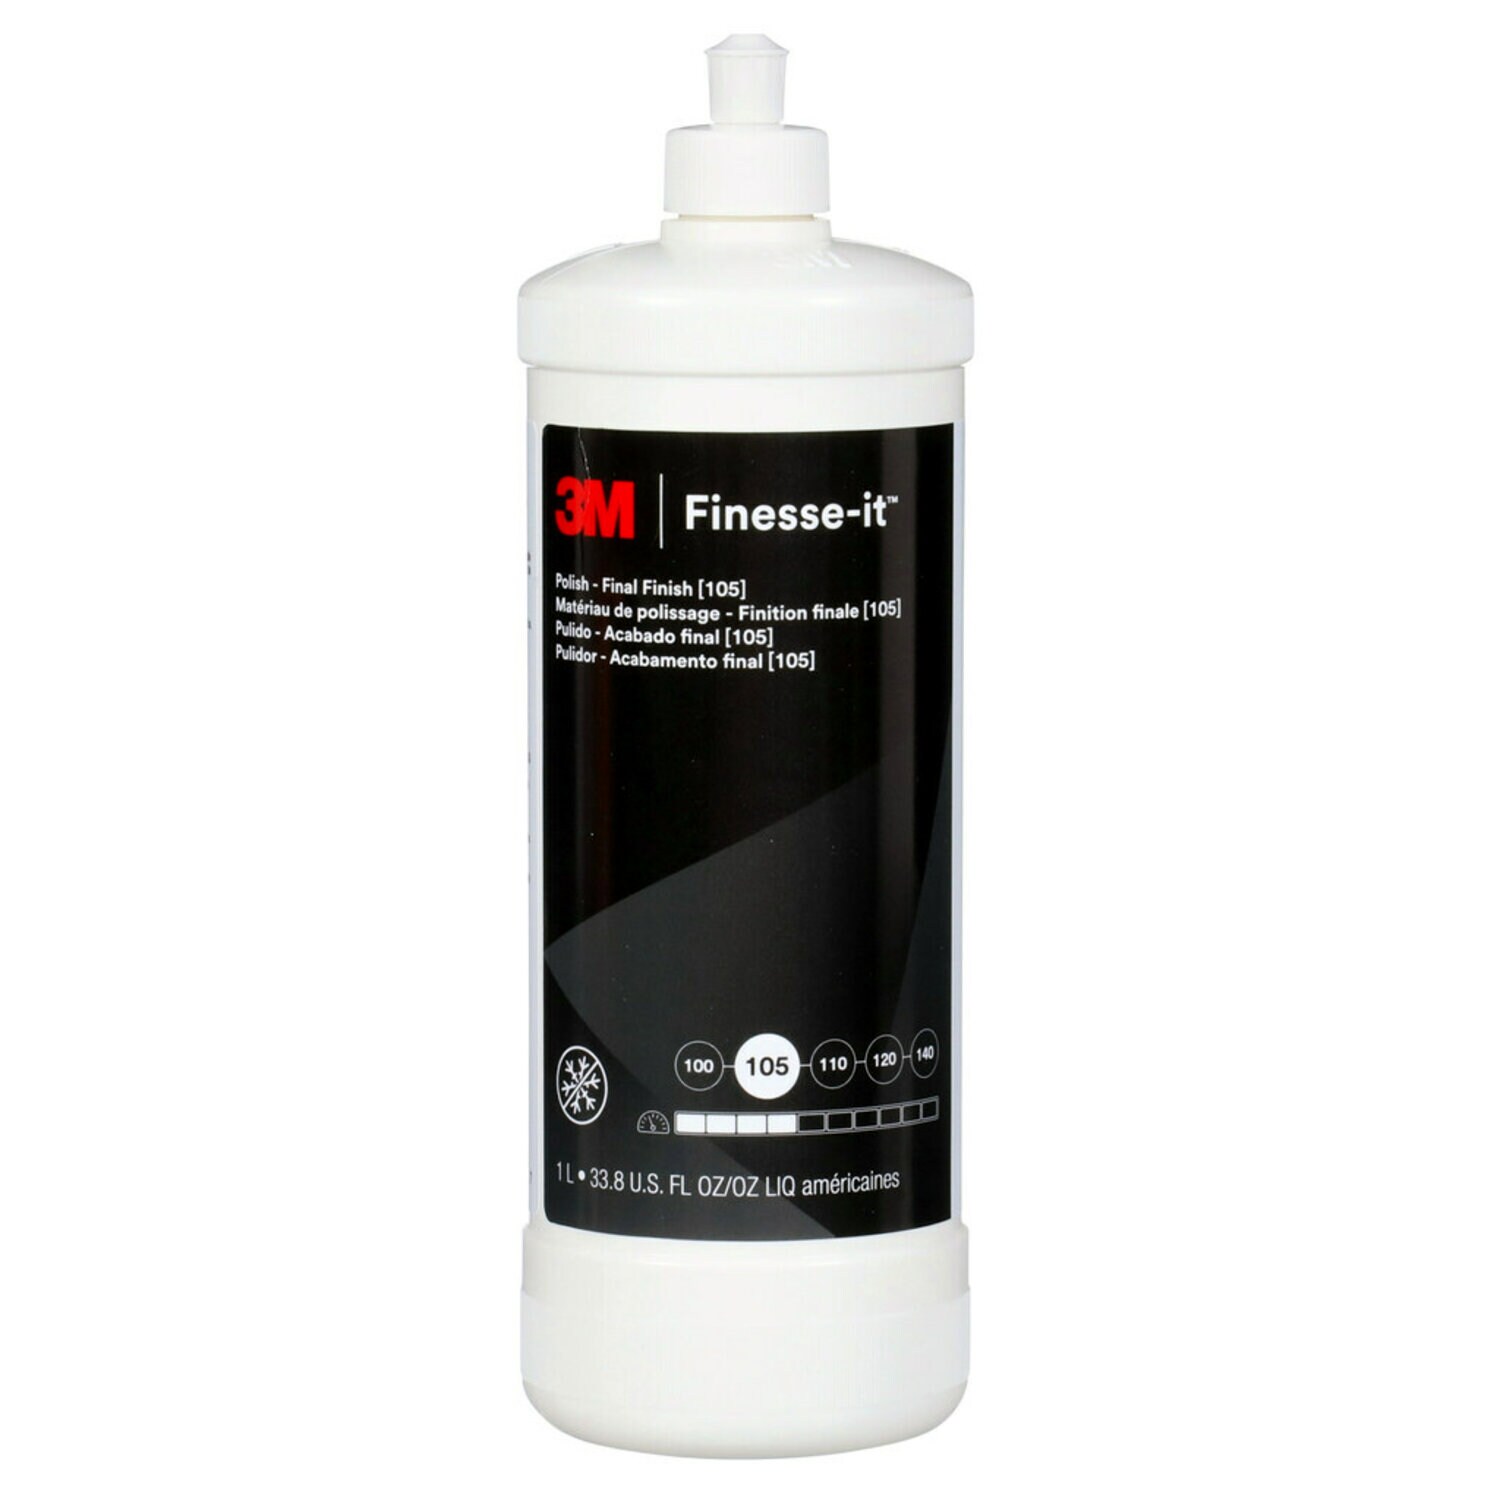 7100075516 - 3M Finesse-it Polish Standard Series, 82877, Final Finish (105), Gray,
Easy Clean Up, Liter (33.814 oz), 12 ea/Case